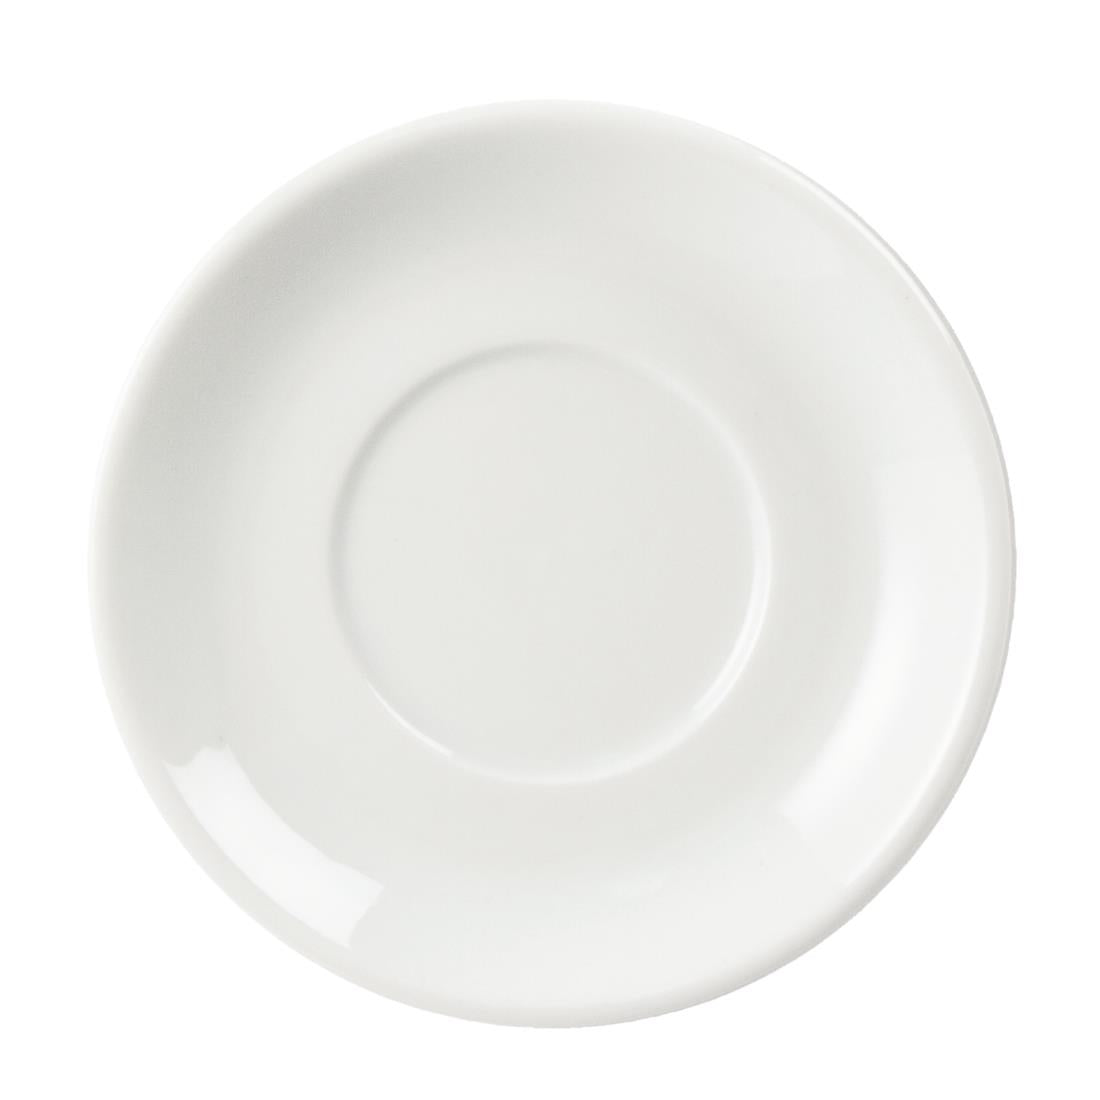 CB472 Olympia Whiteware Stacking Espresso Saucers (Pack of 12)